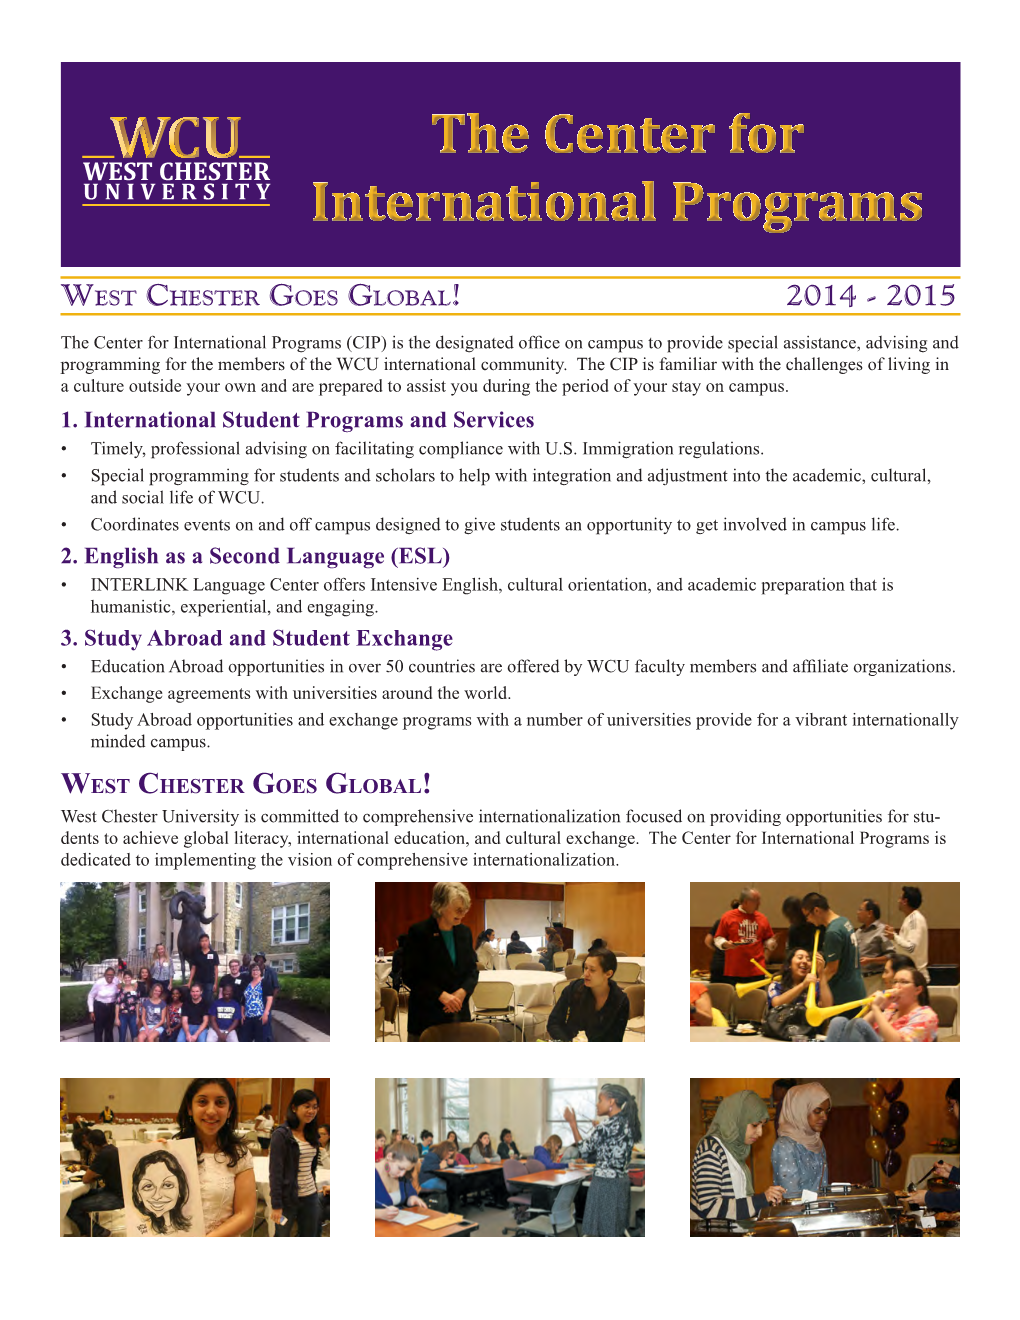 West Chester University Information